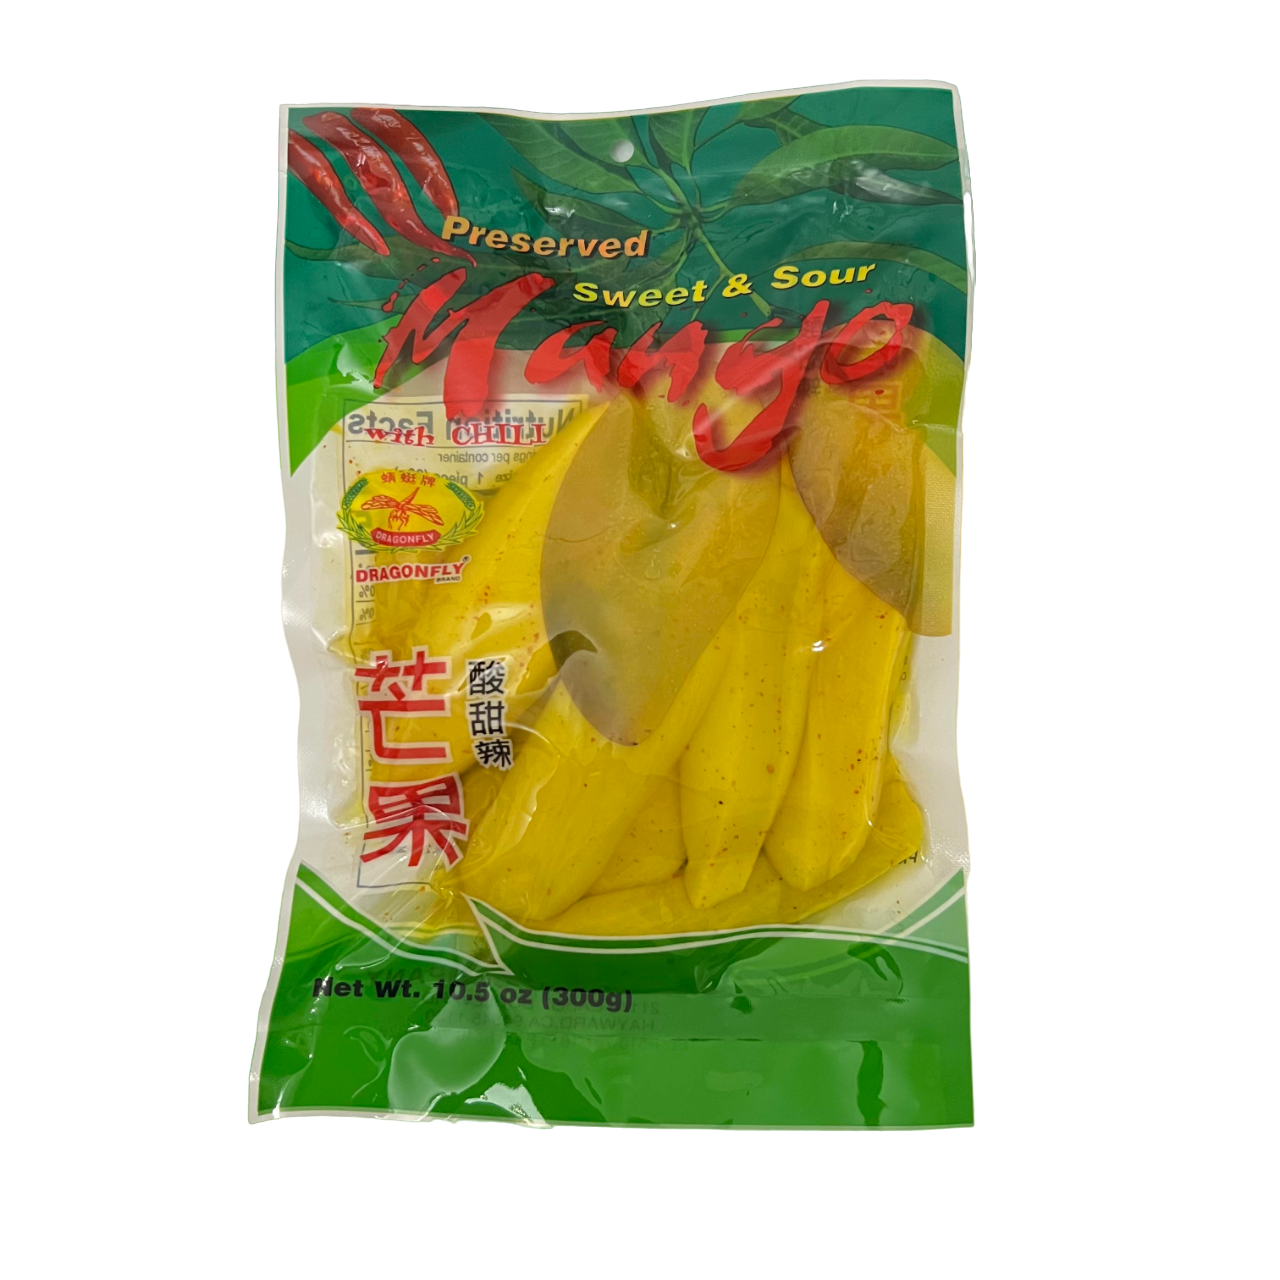 Thai Preserved Sweet and Sour Mango with Chili